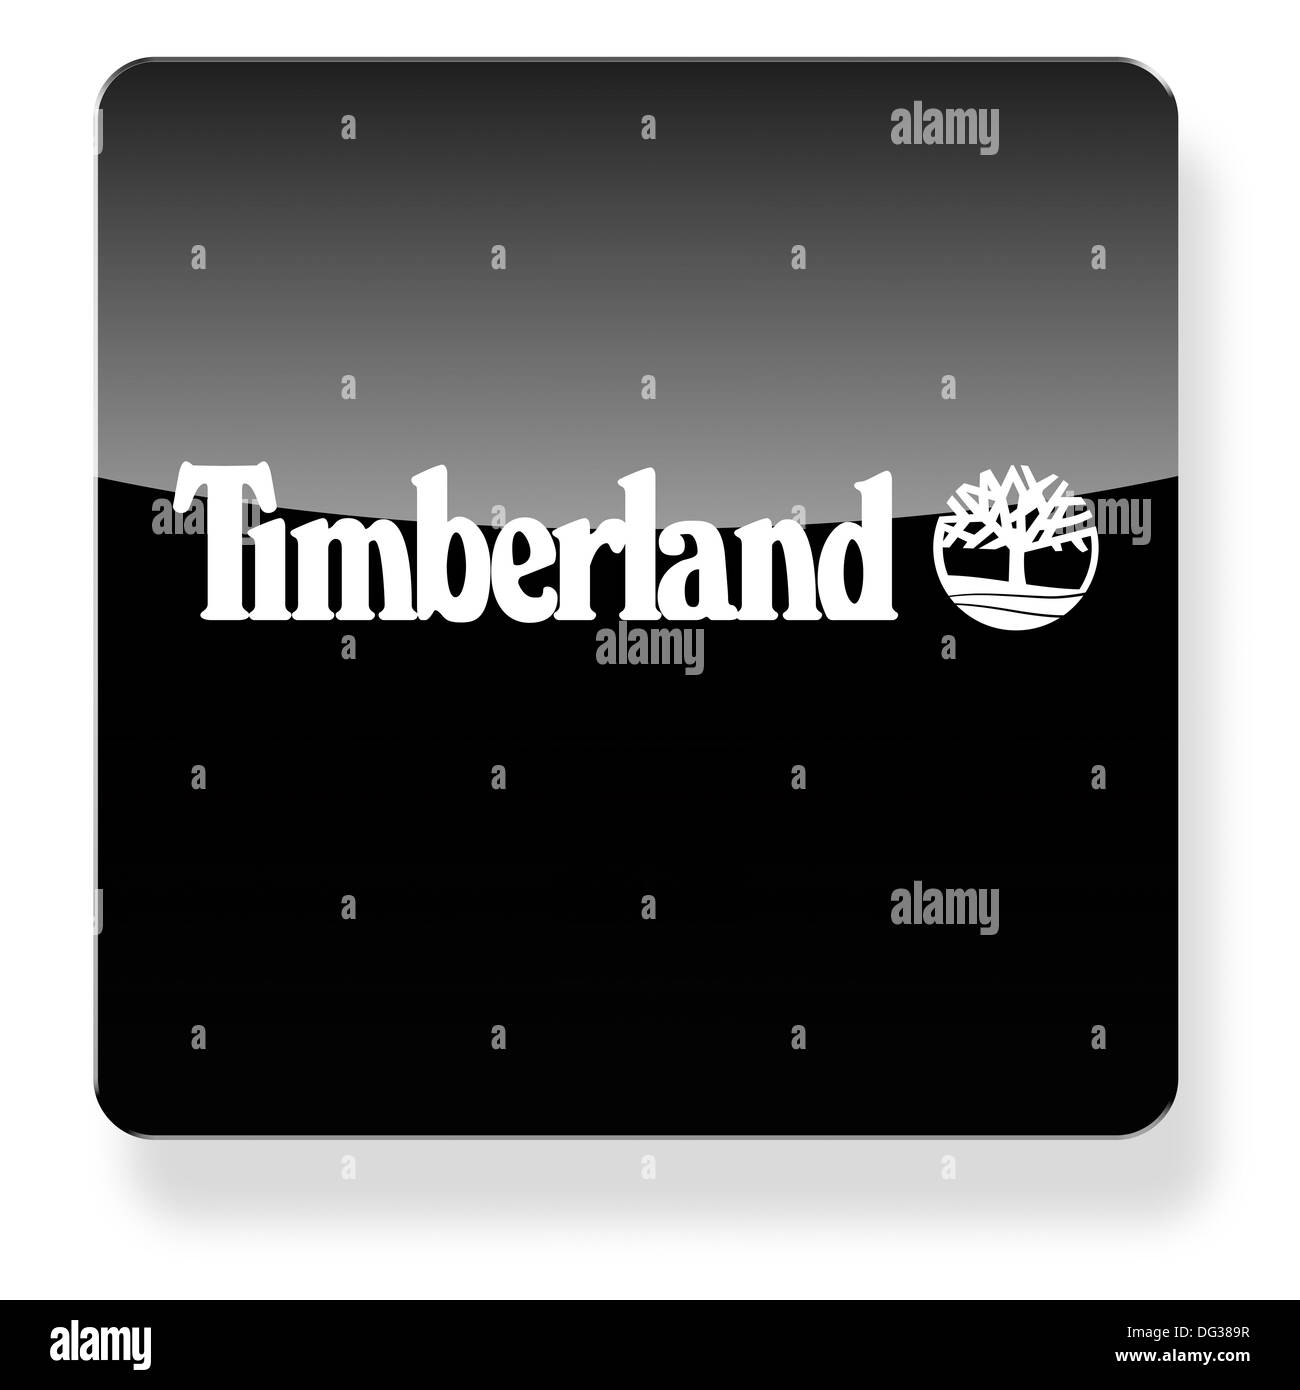 Timberland logo as an app icon. Clipping path included Stock Photo - Alamy